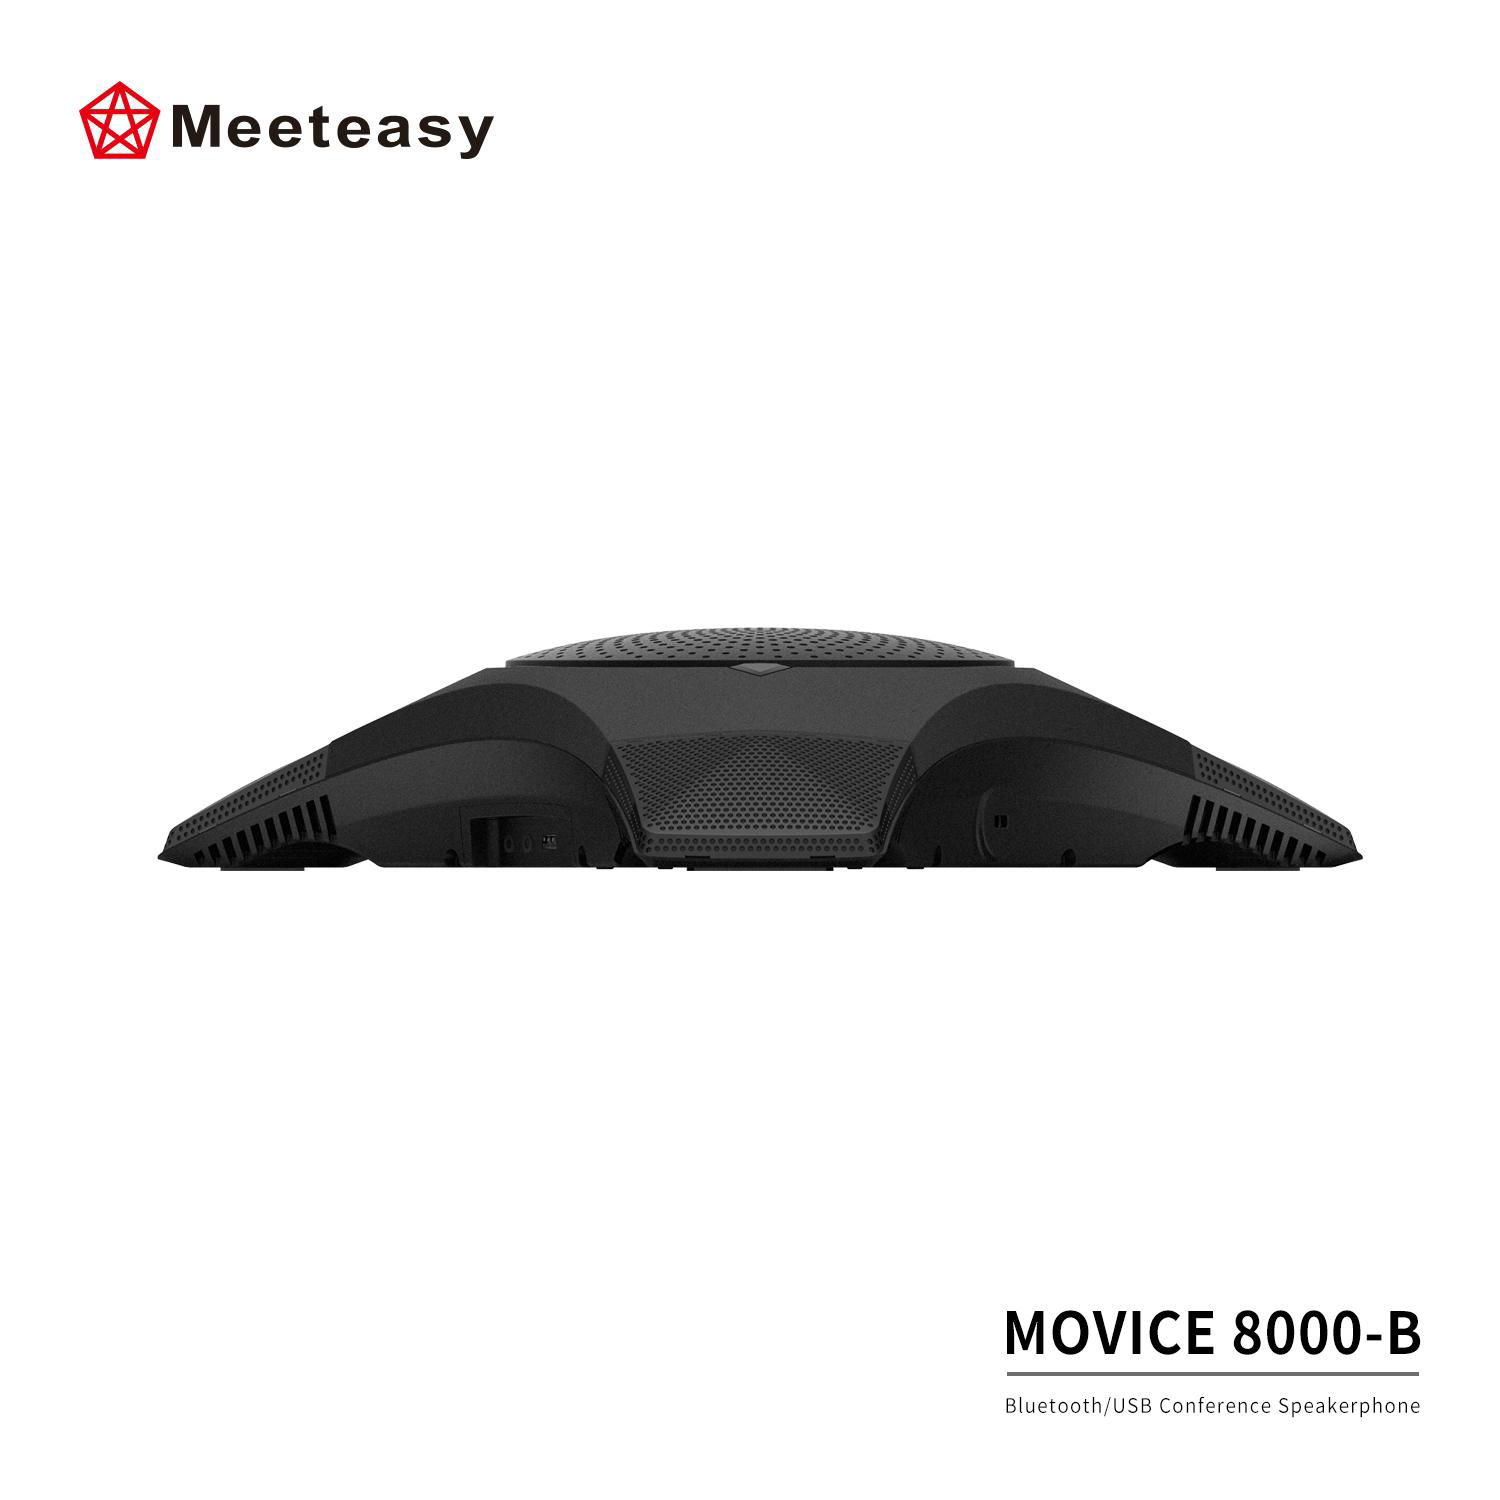 Meeteasy MVOICE 8000-B BT Conference Speakerphone for Web Based Conferencing 3